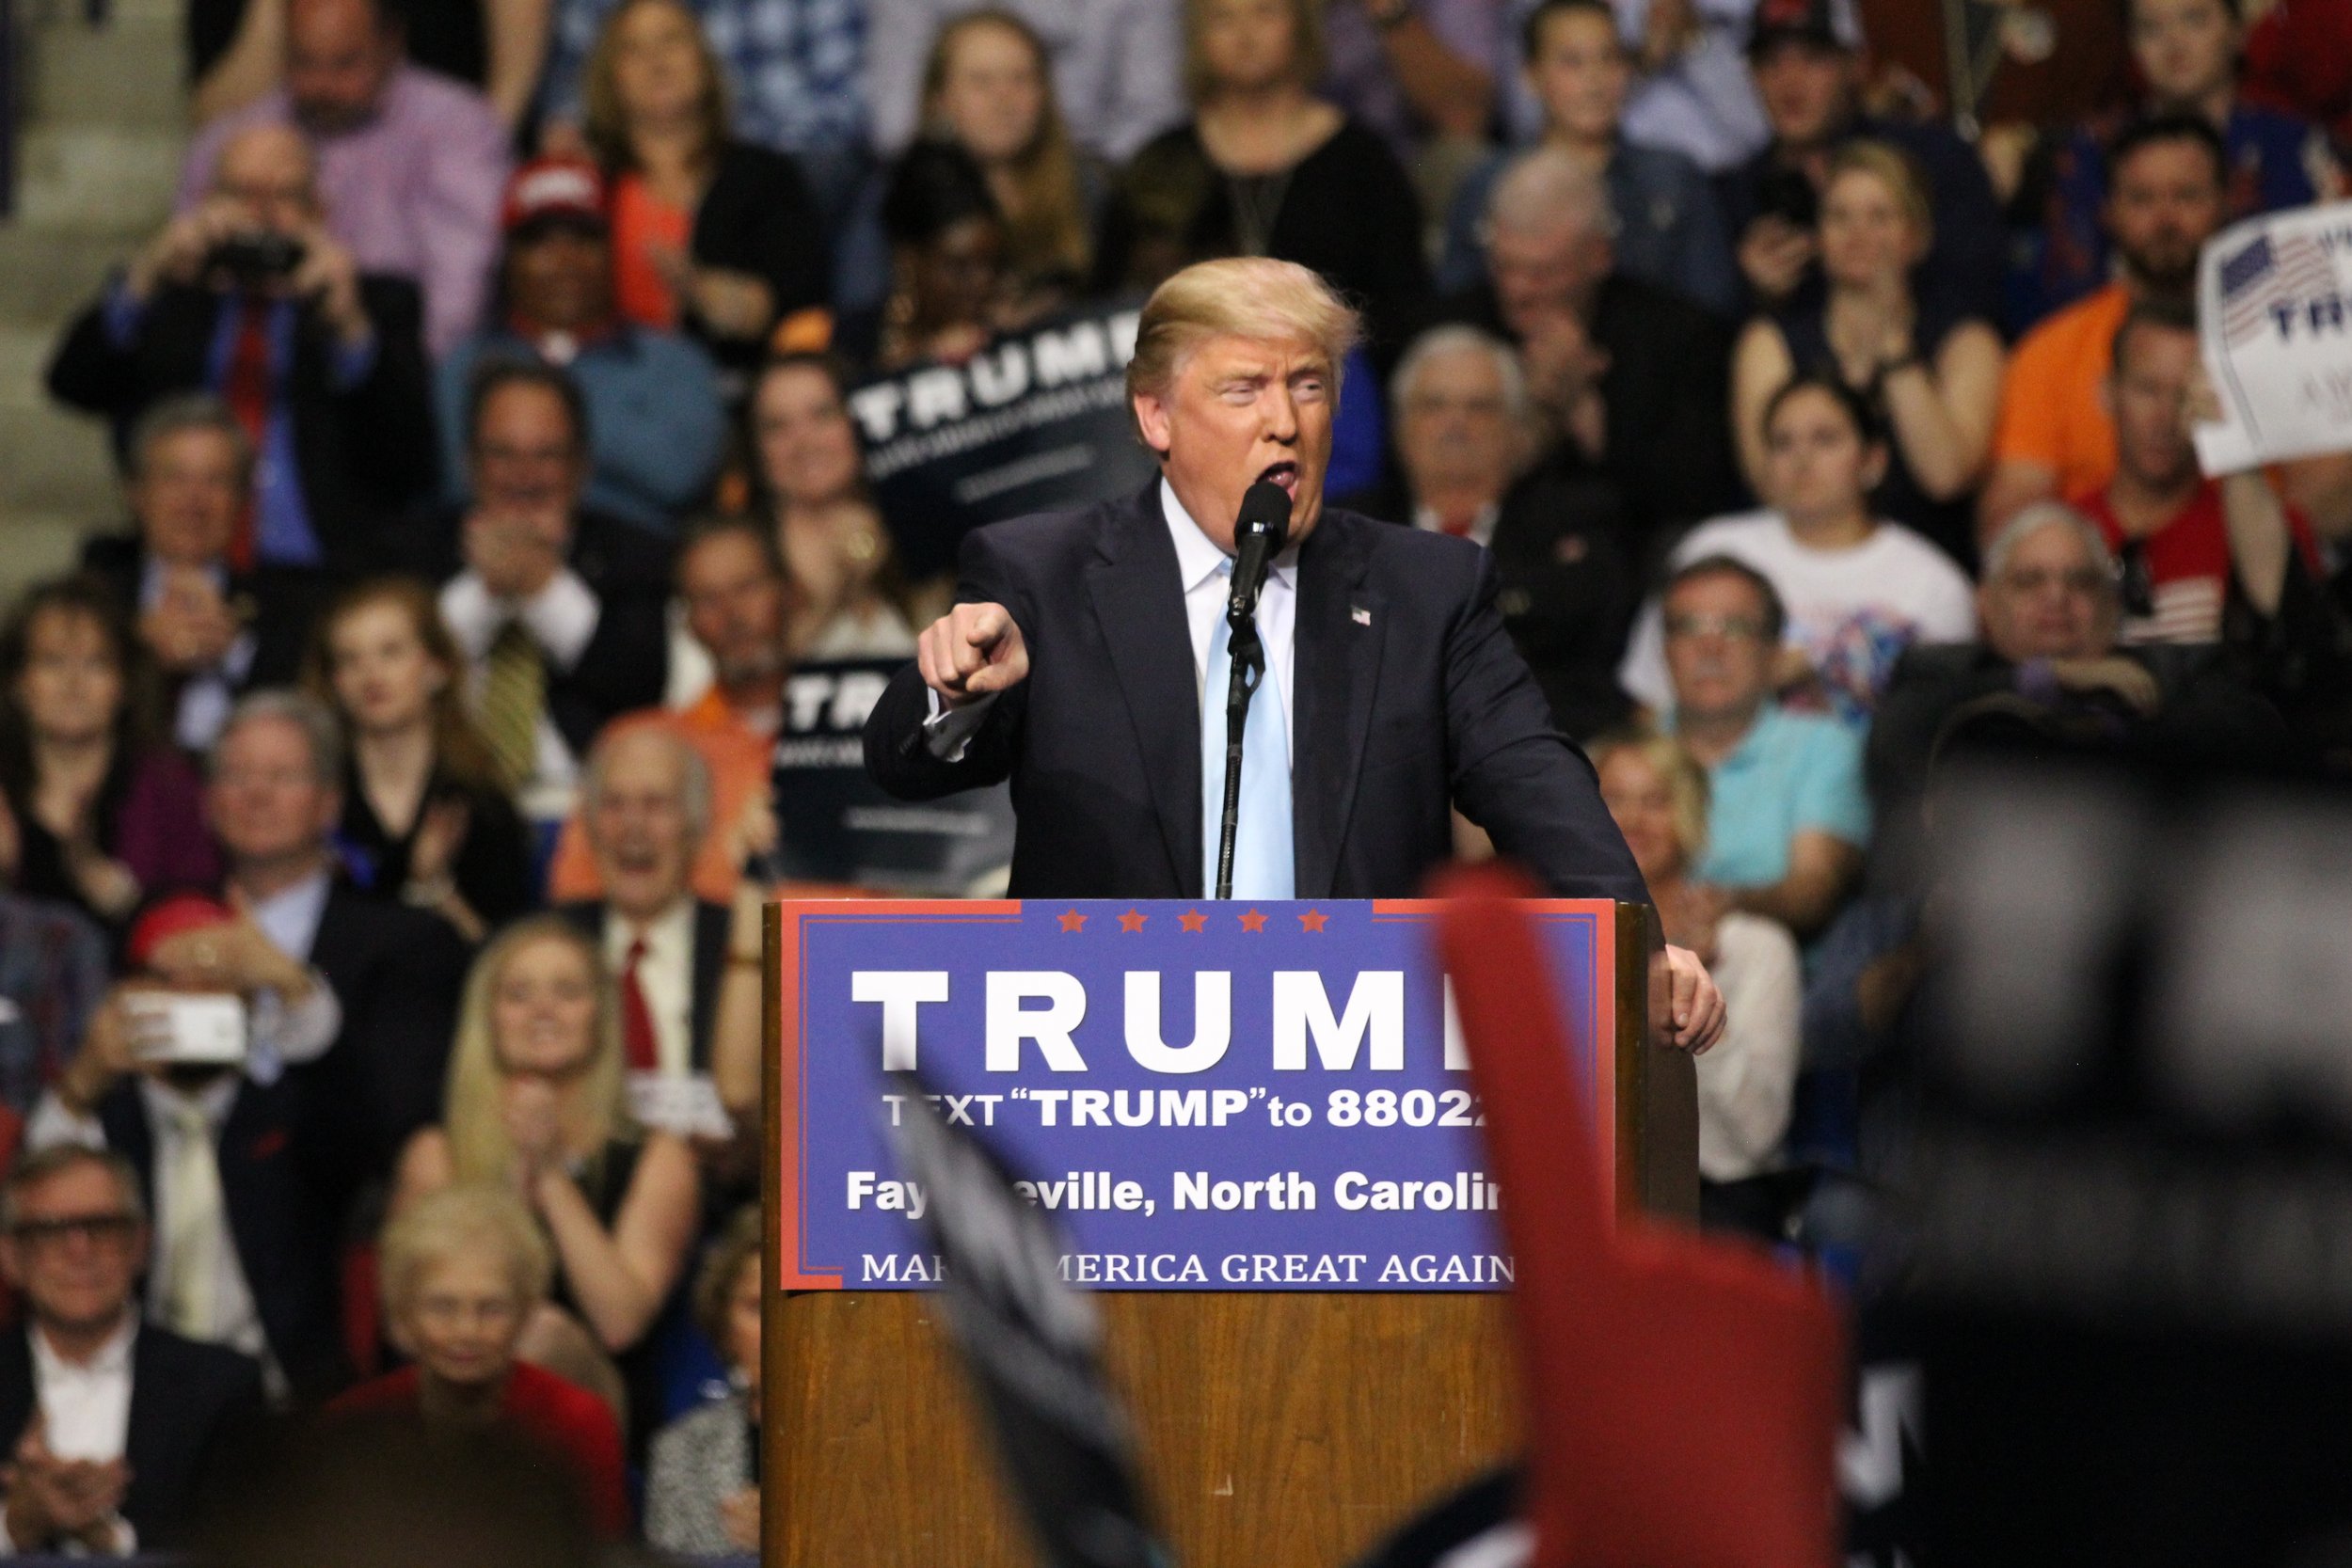  Businessman Donald Trump fires up the crowd during a campaign rally held March 9, 2016, in Fayetteville, N.C.&nbsp; 